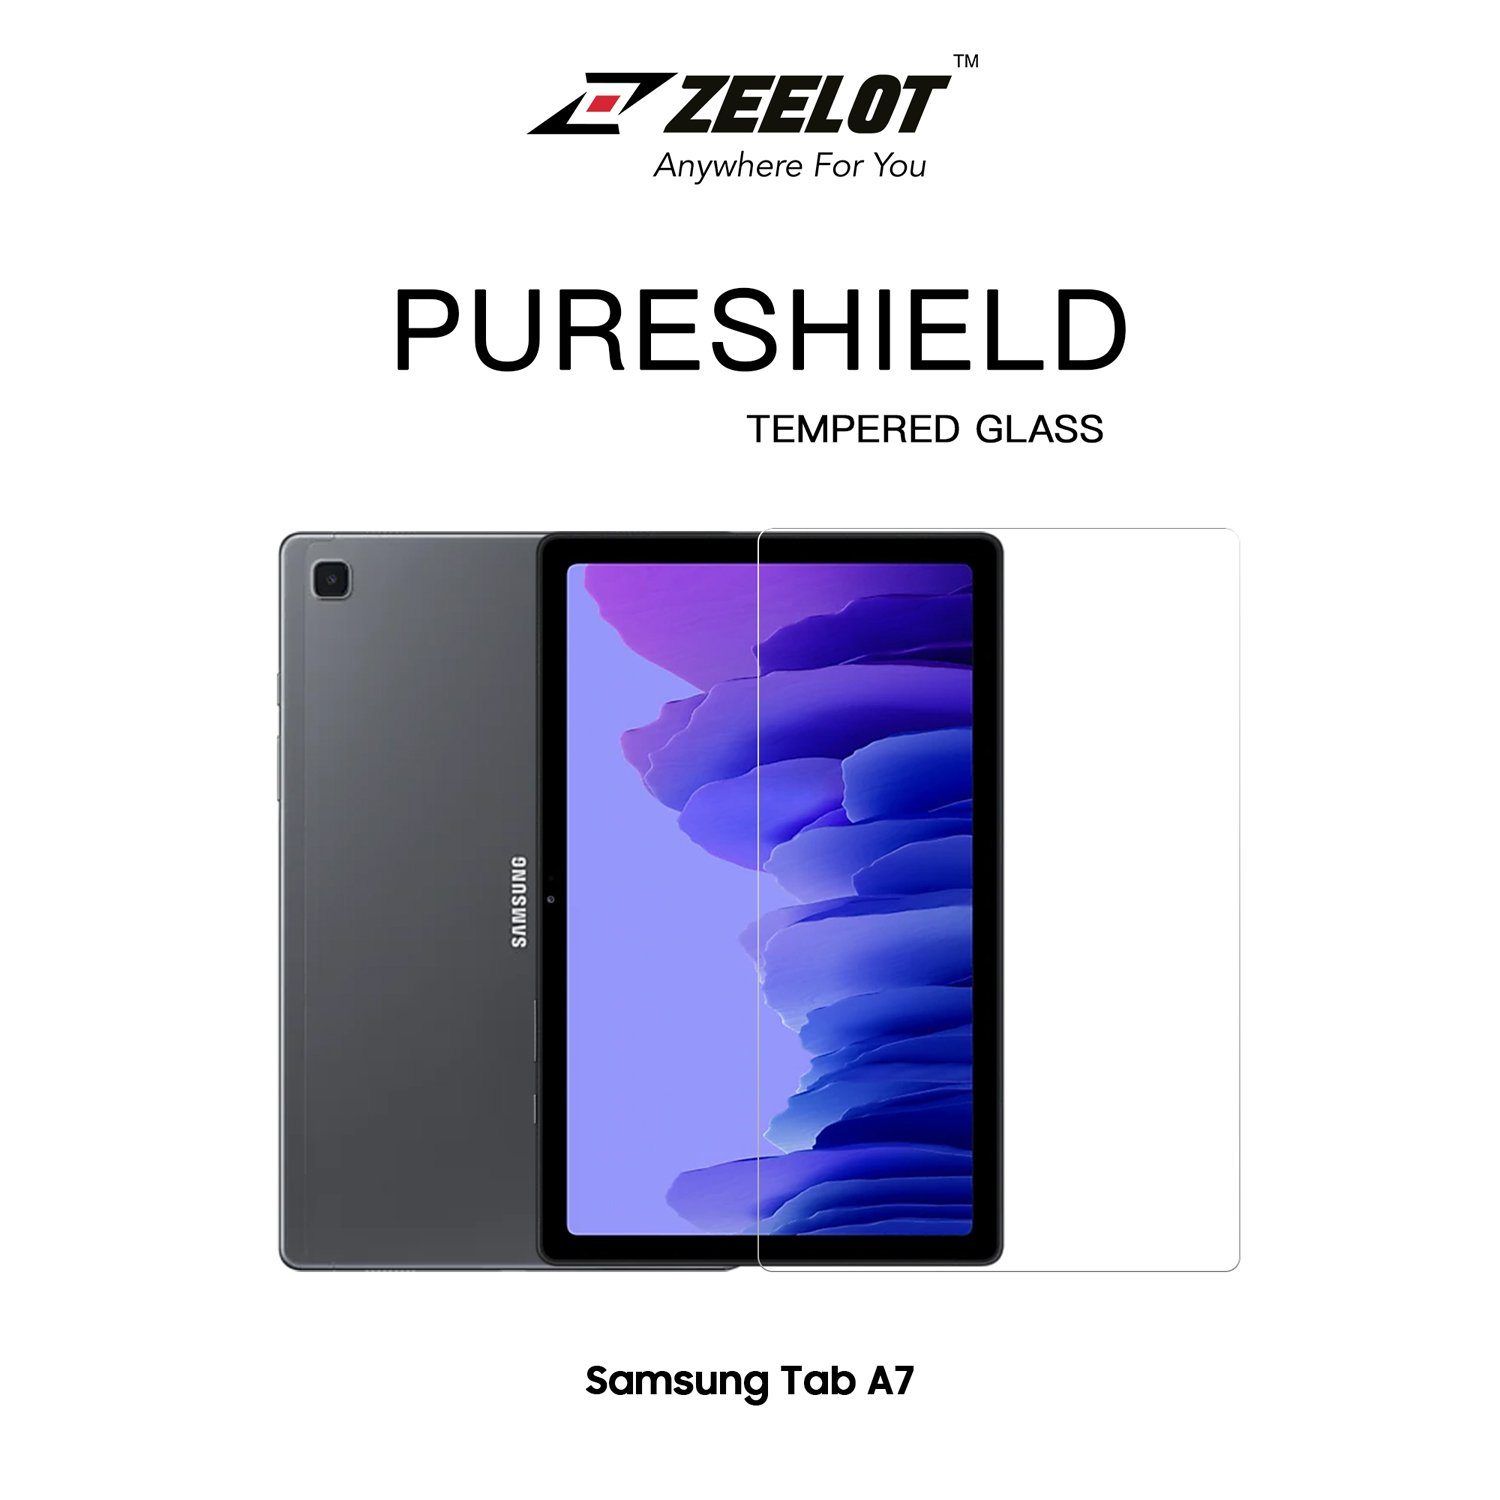 ZEELOT PureShield 2.5D Tempered Glass Screen Protector for Samsung Galaxy Tab A7 (2020), Clear Tab A7 ZEELOT 